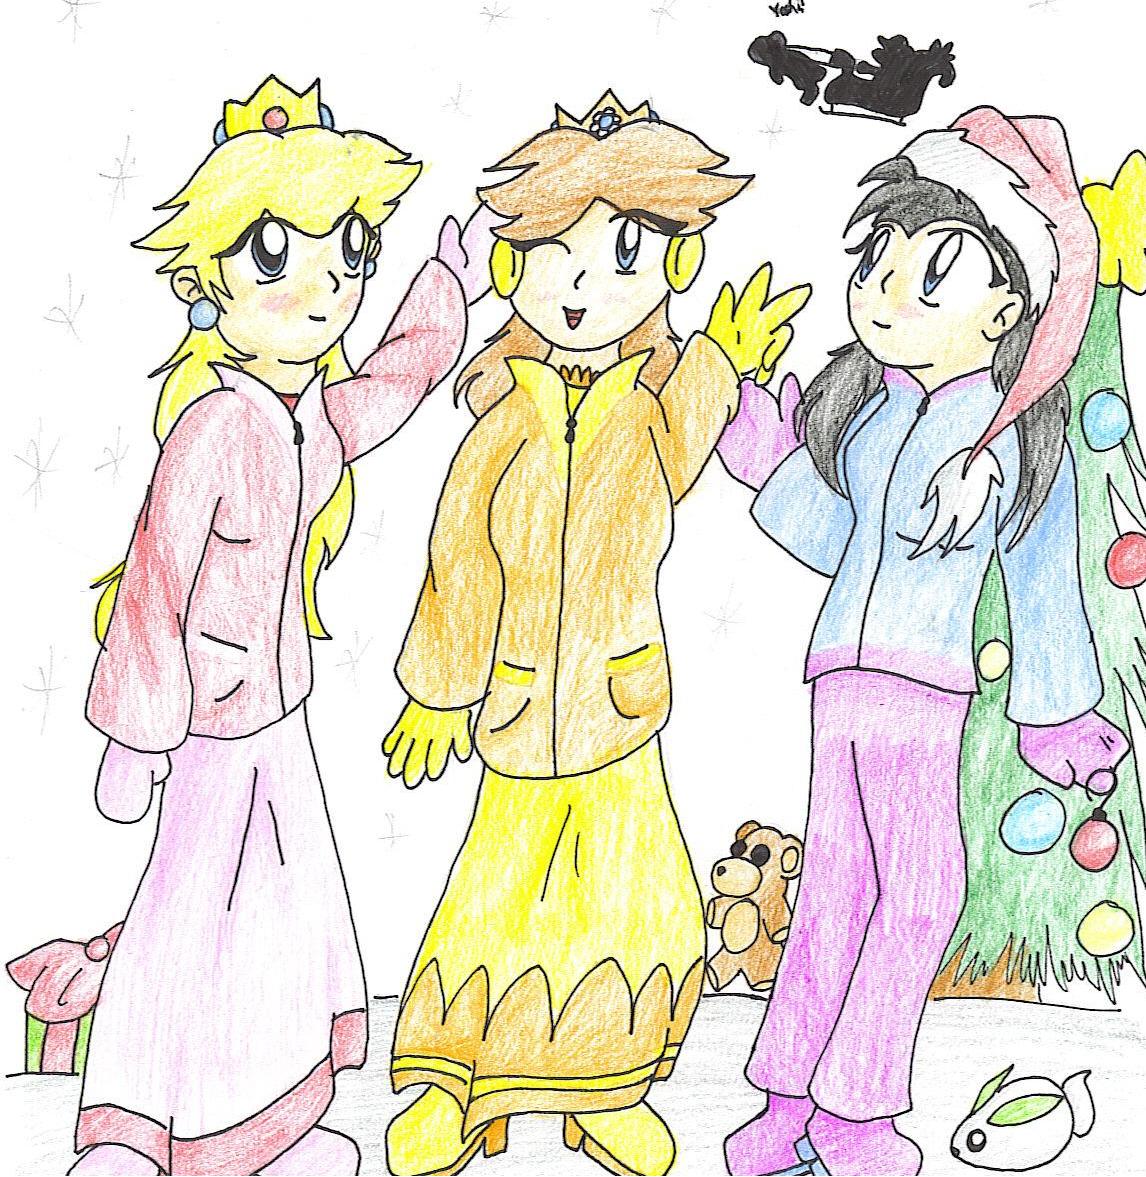 Happy Holidays From Peach, Daisy and Plum by Kikiyothedragon